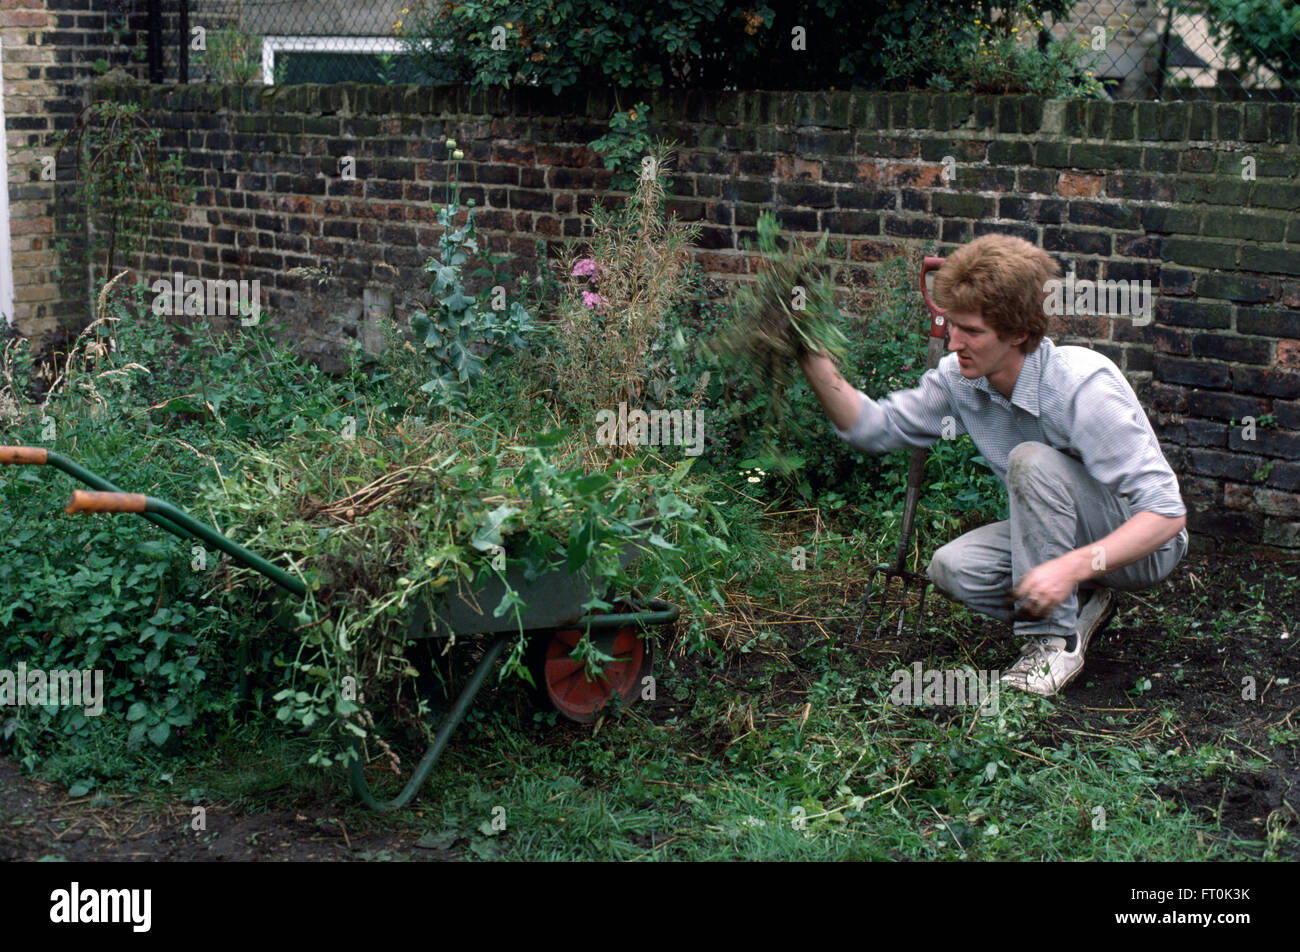 Gardener clearing an overgrown border     FOR EDITORIAL USE ONLY Stock Photo